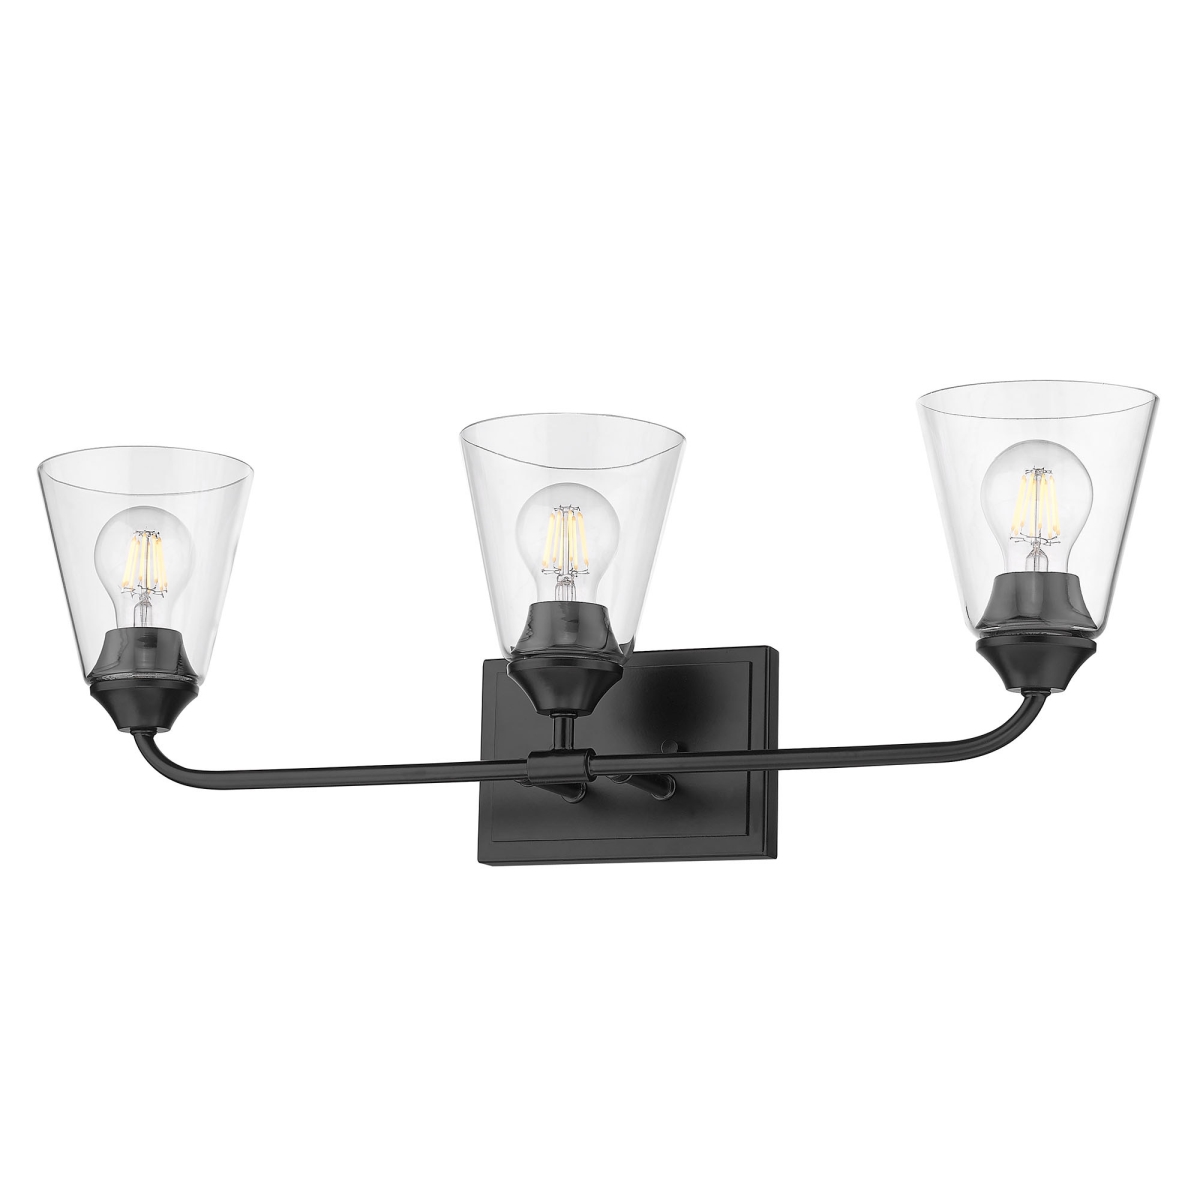 2120-ba3 Blk-cone-clr Ormond 3 Light Bath Vanity In Black With Conical Clear Glass Shade